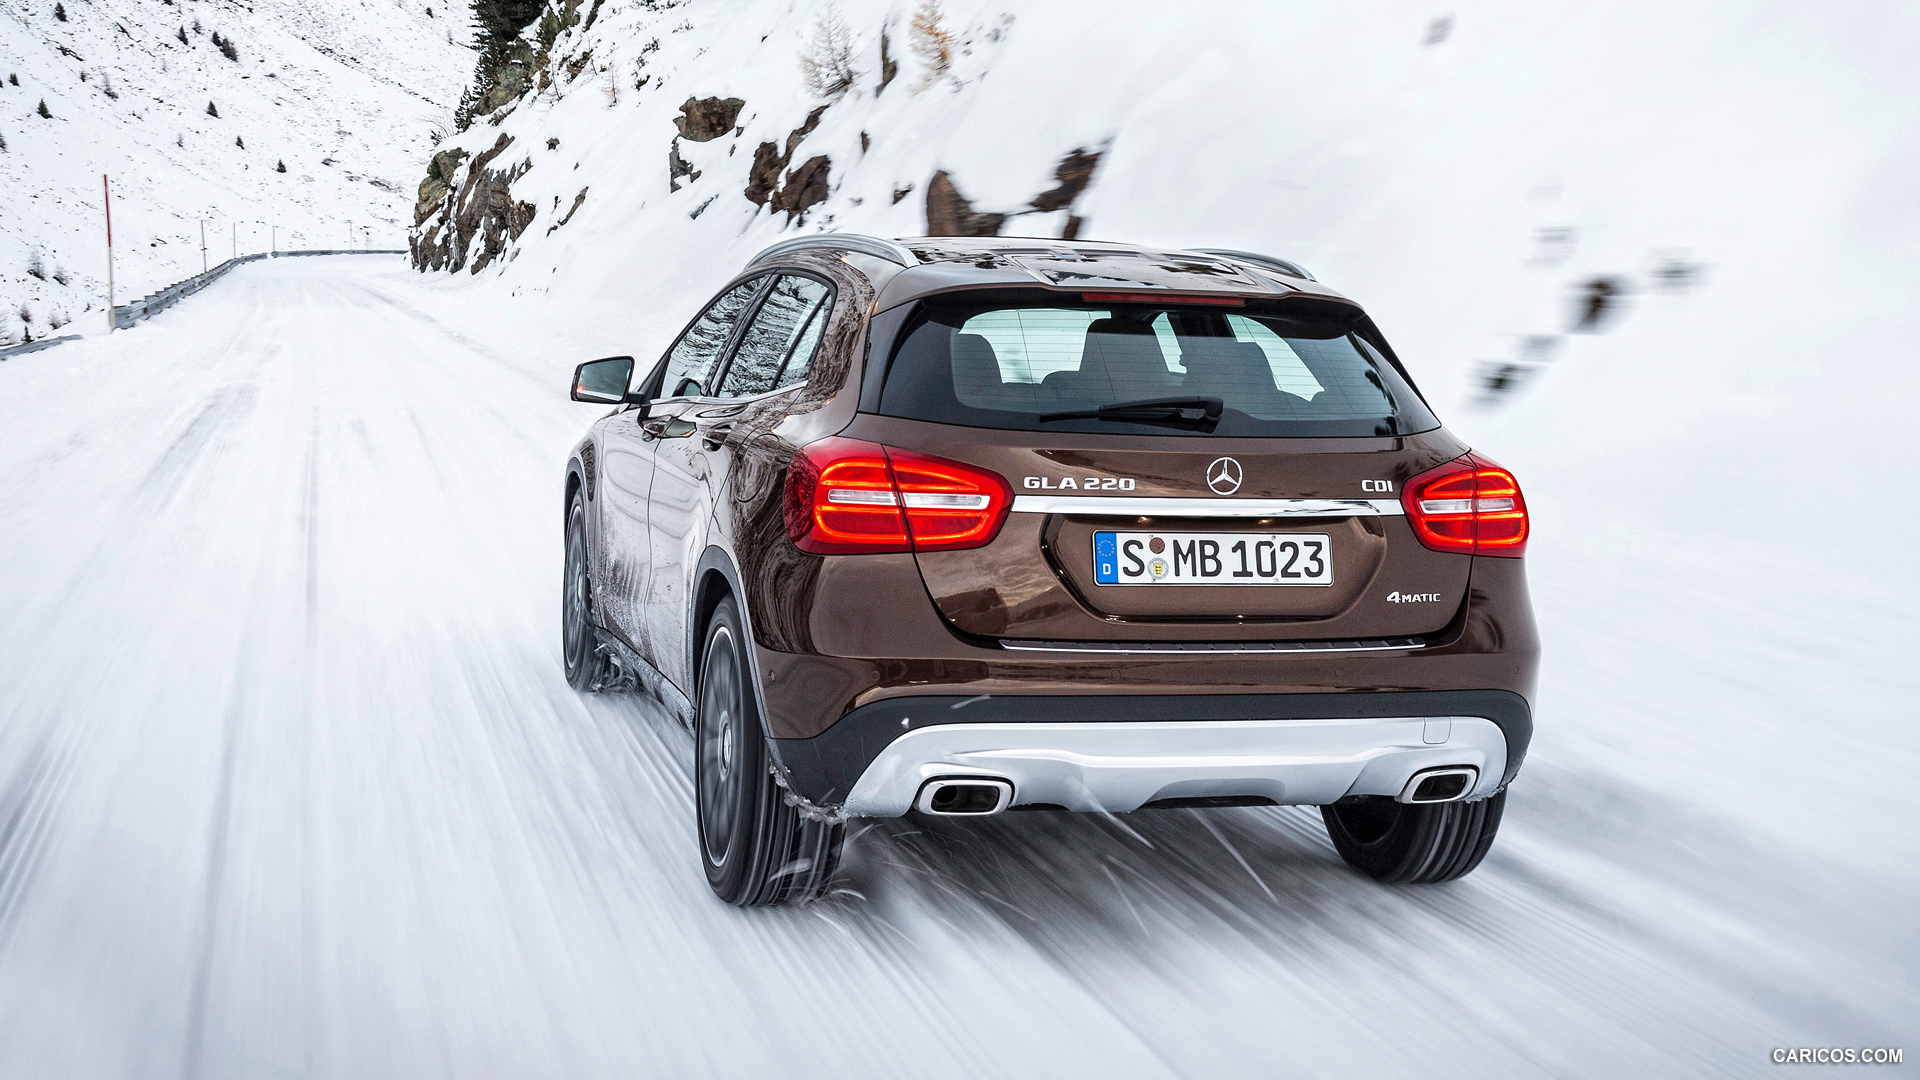 2015 Mercedes-Benz GLA 220 CDI 4MATIC - In Snow - Rear, #67 of 71